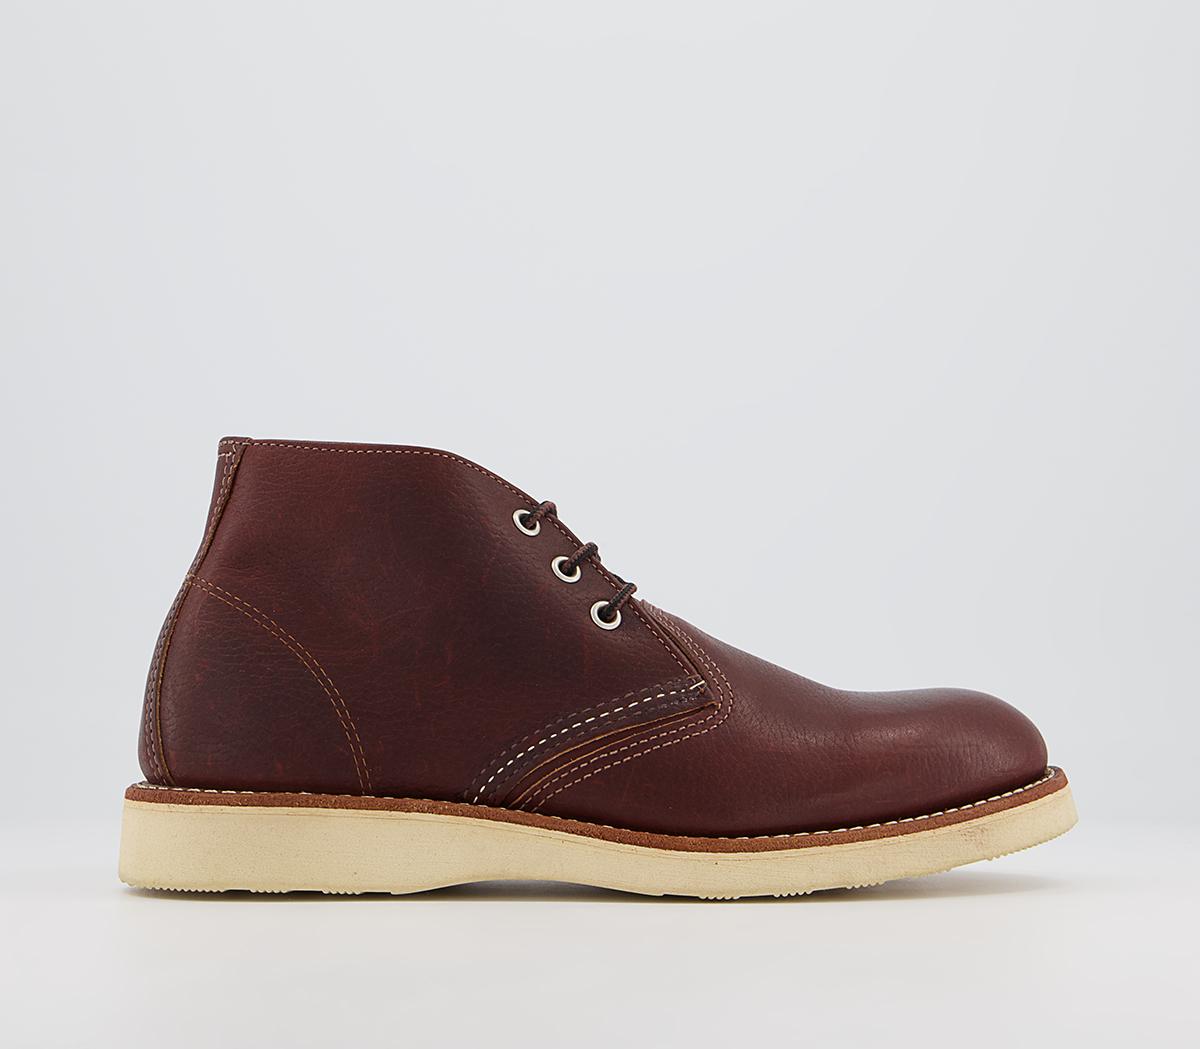 Red WingWork Chukka bootsBrown Leather